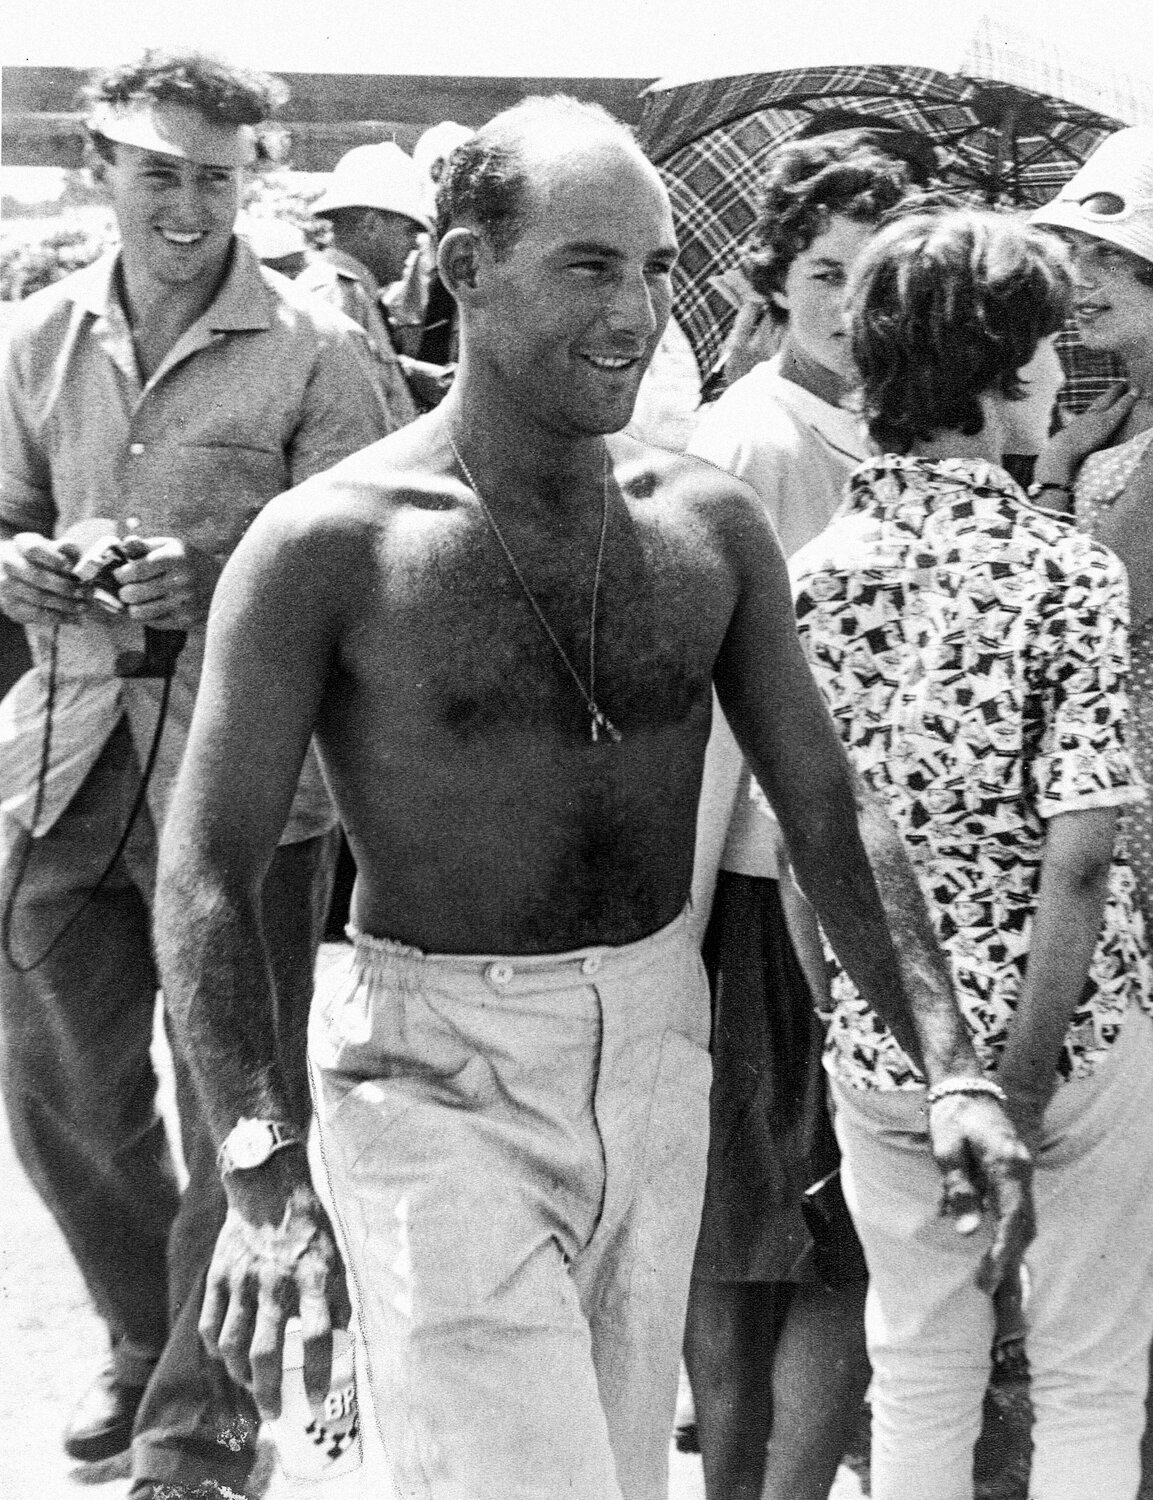 A fit and happy Stirling Moss in the pits for the 1962 Lady Wigram Trophy race at Wigram in Christchurch. He won the race in his Lotus 21 Climax (photo: Robin Curtis)